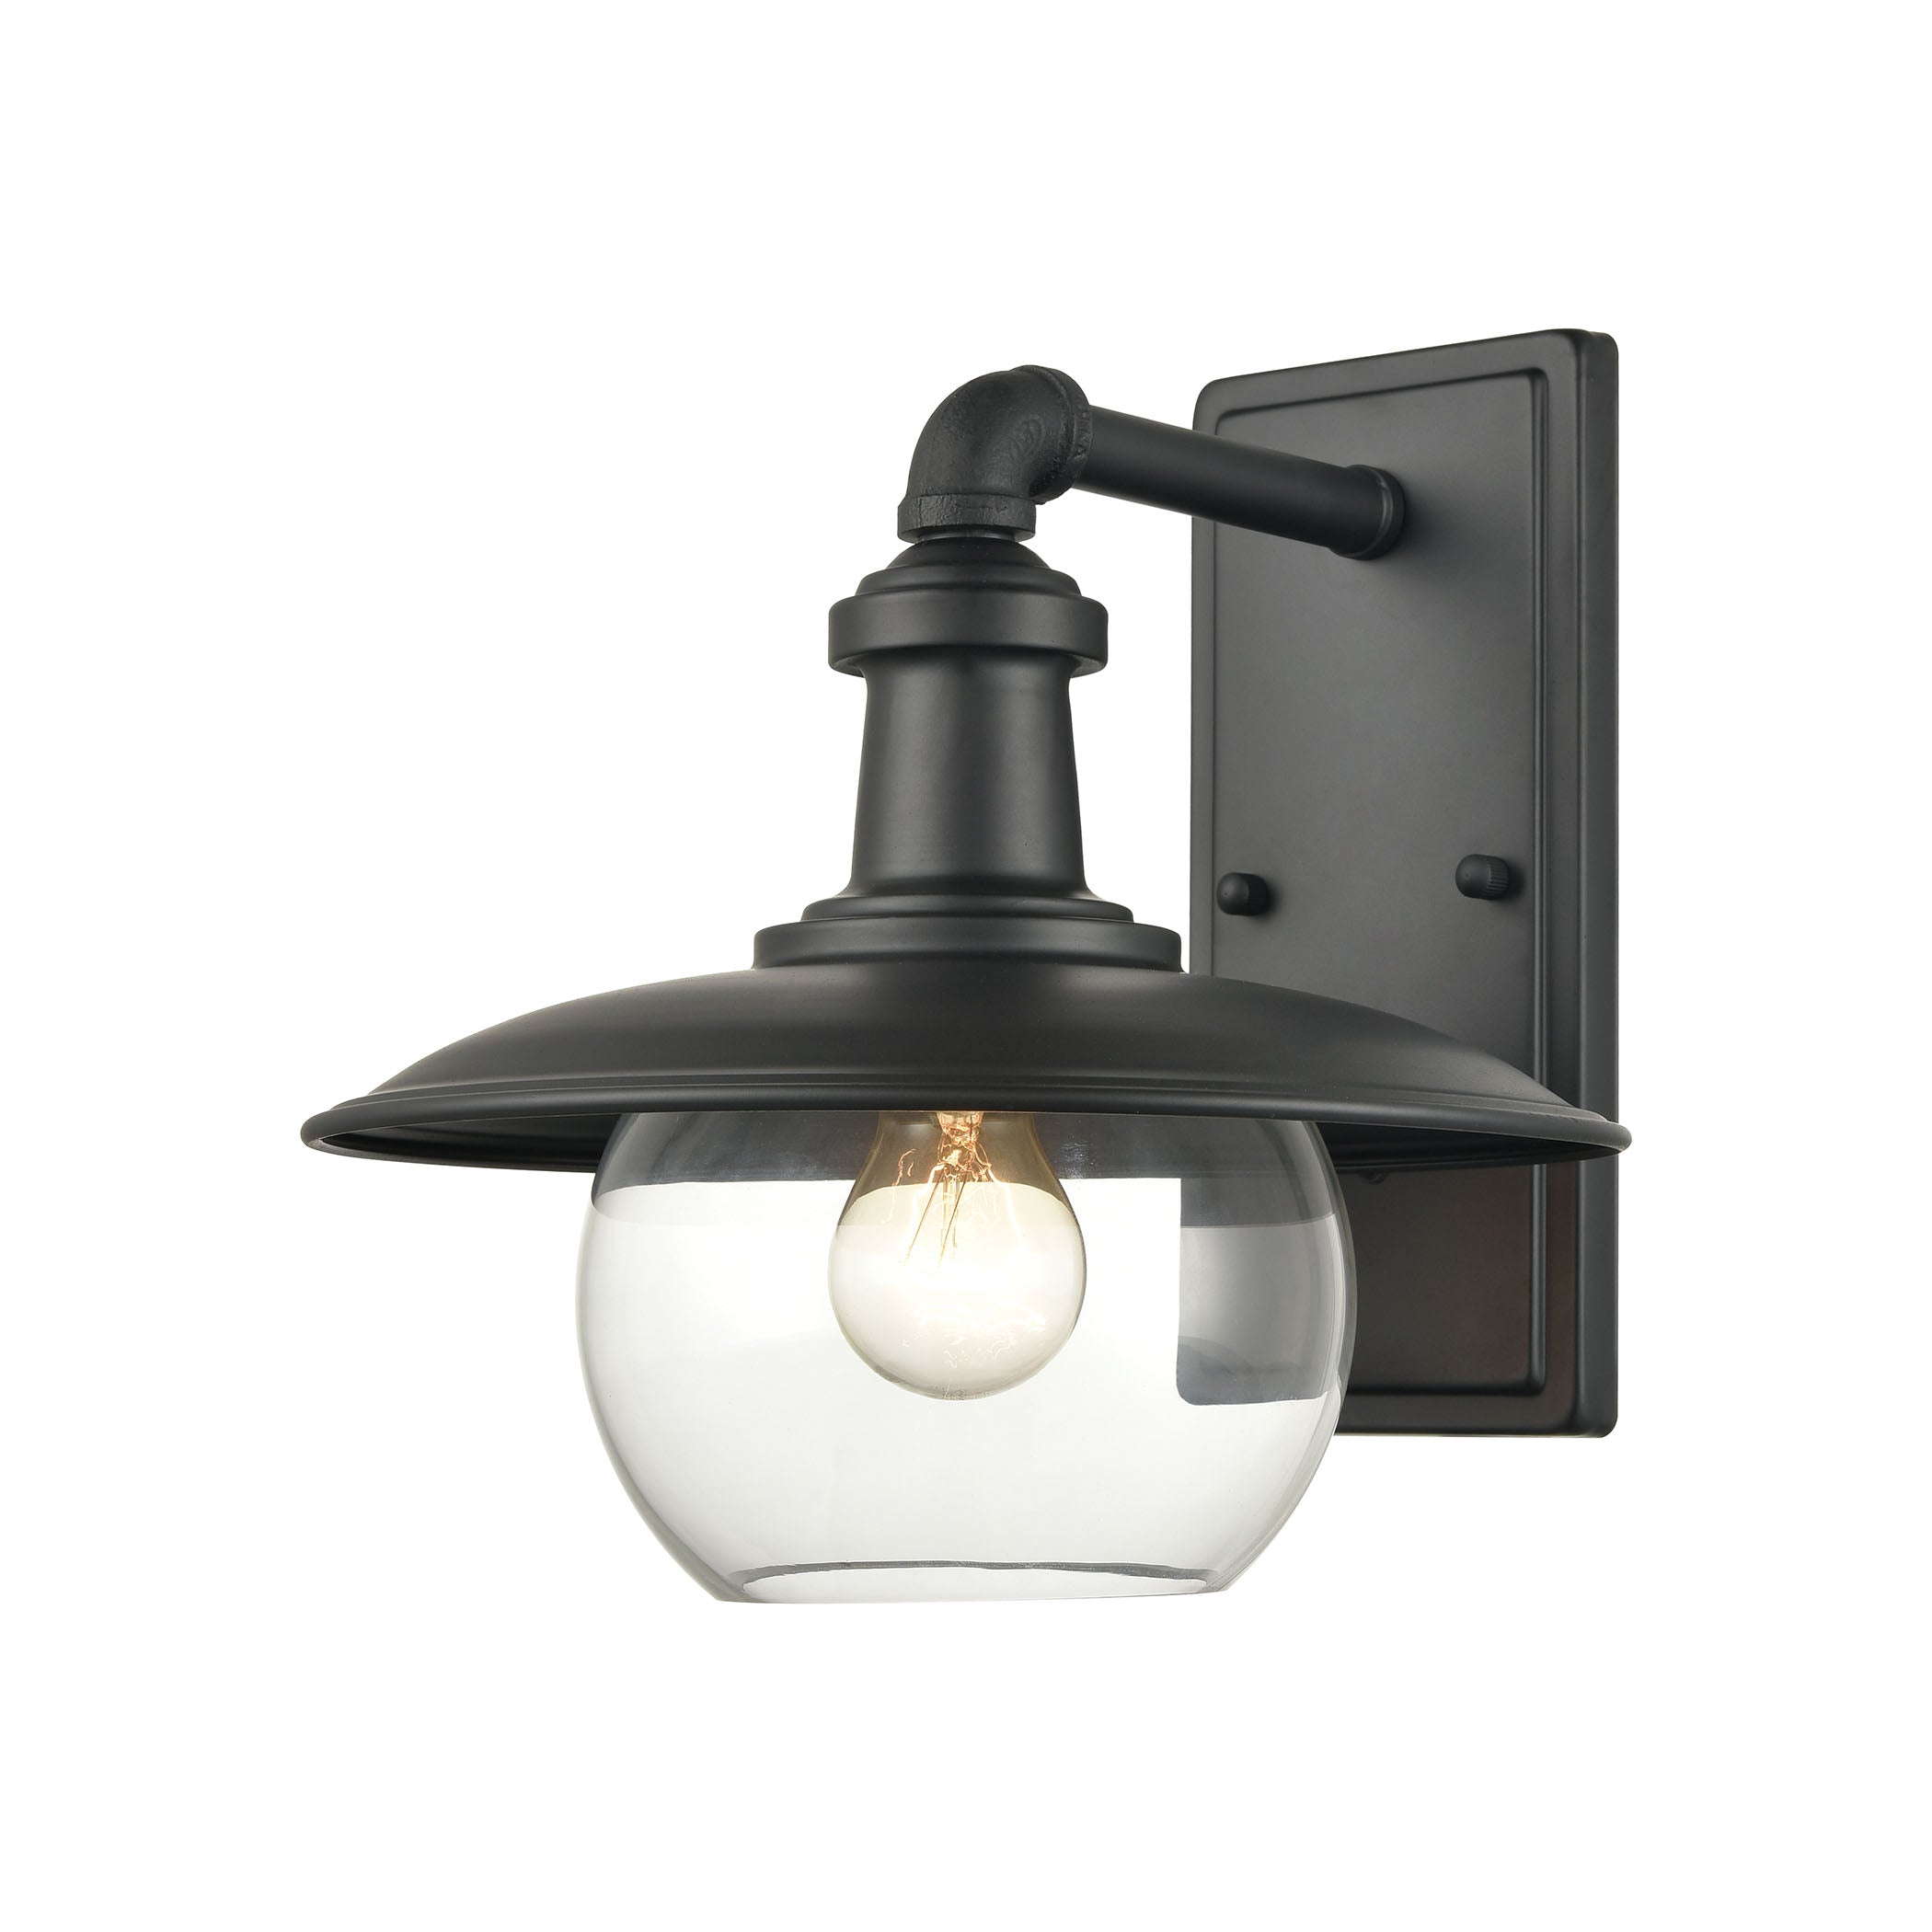 ELK Lighting 45430/1 Jackson 1-Light Outdoor Sconce in Matte Black with Clear Glass